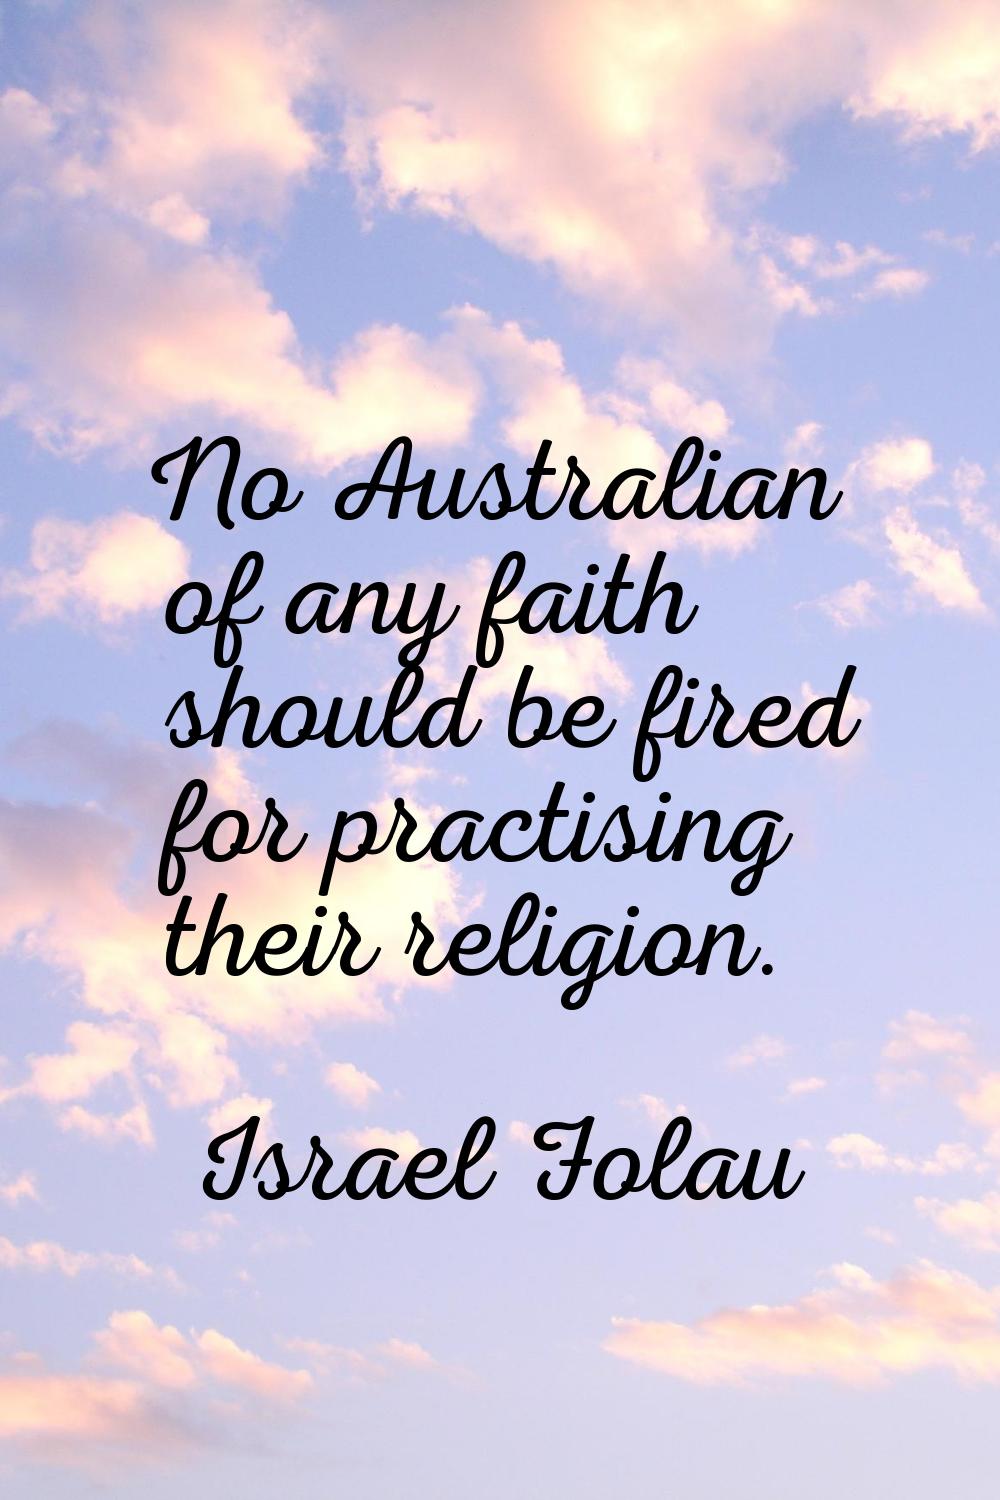 No Australian of any faith should be fired for practising their religion.